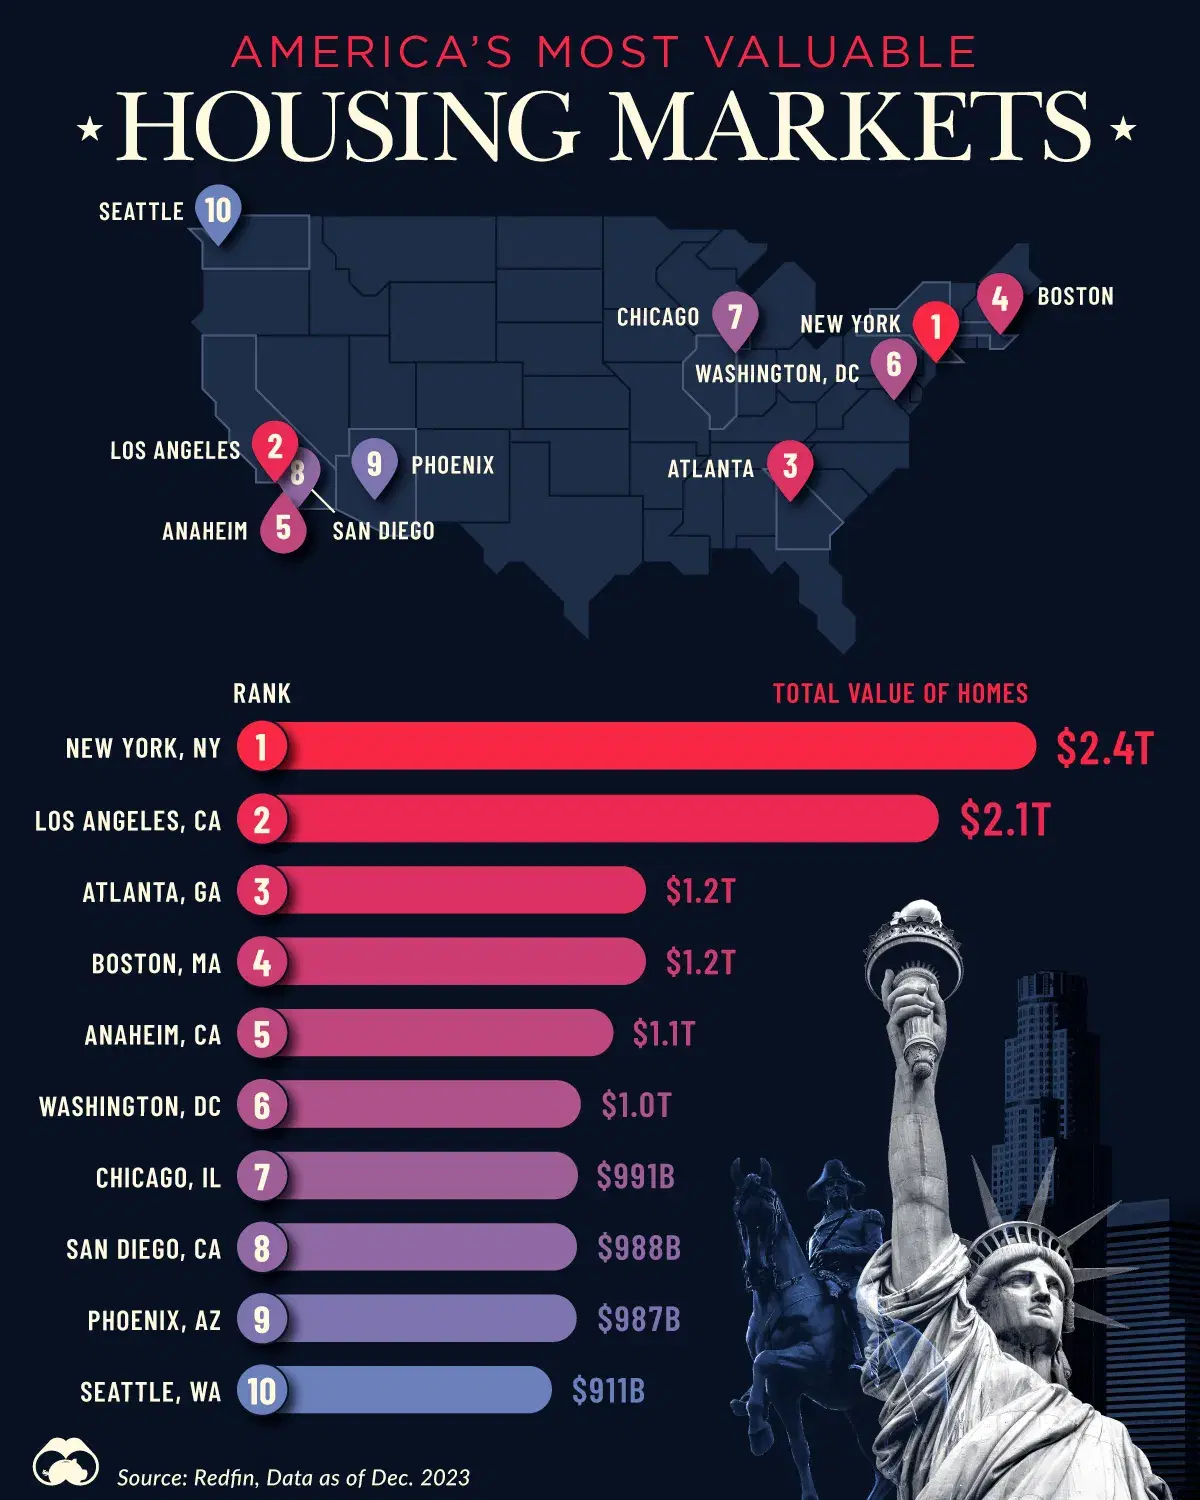 America's Most Valuable Housing Markets